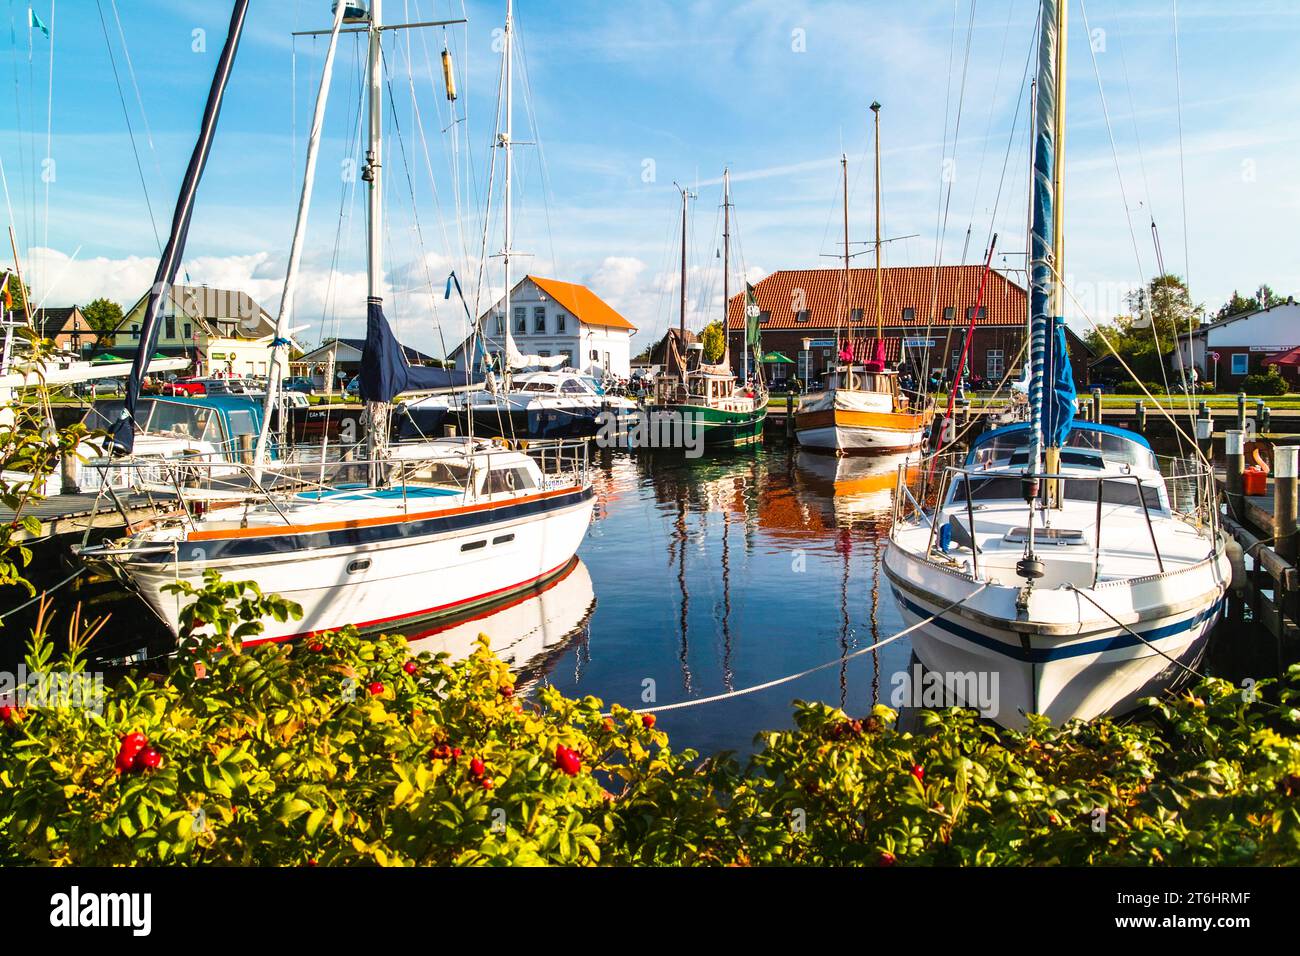 Harbor scene with sailboats and converted fishing boats in Varel inland harbor. Stock Photo